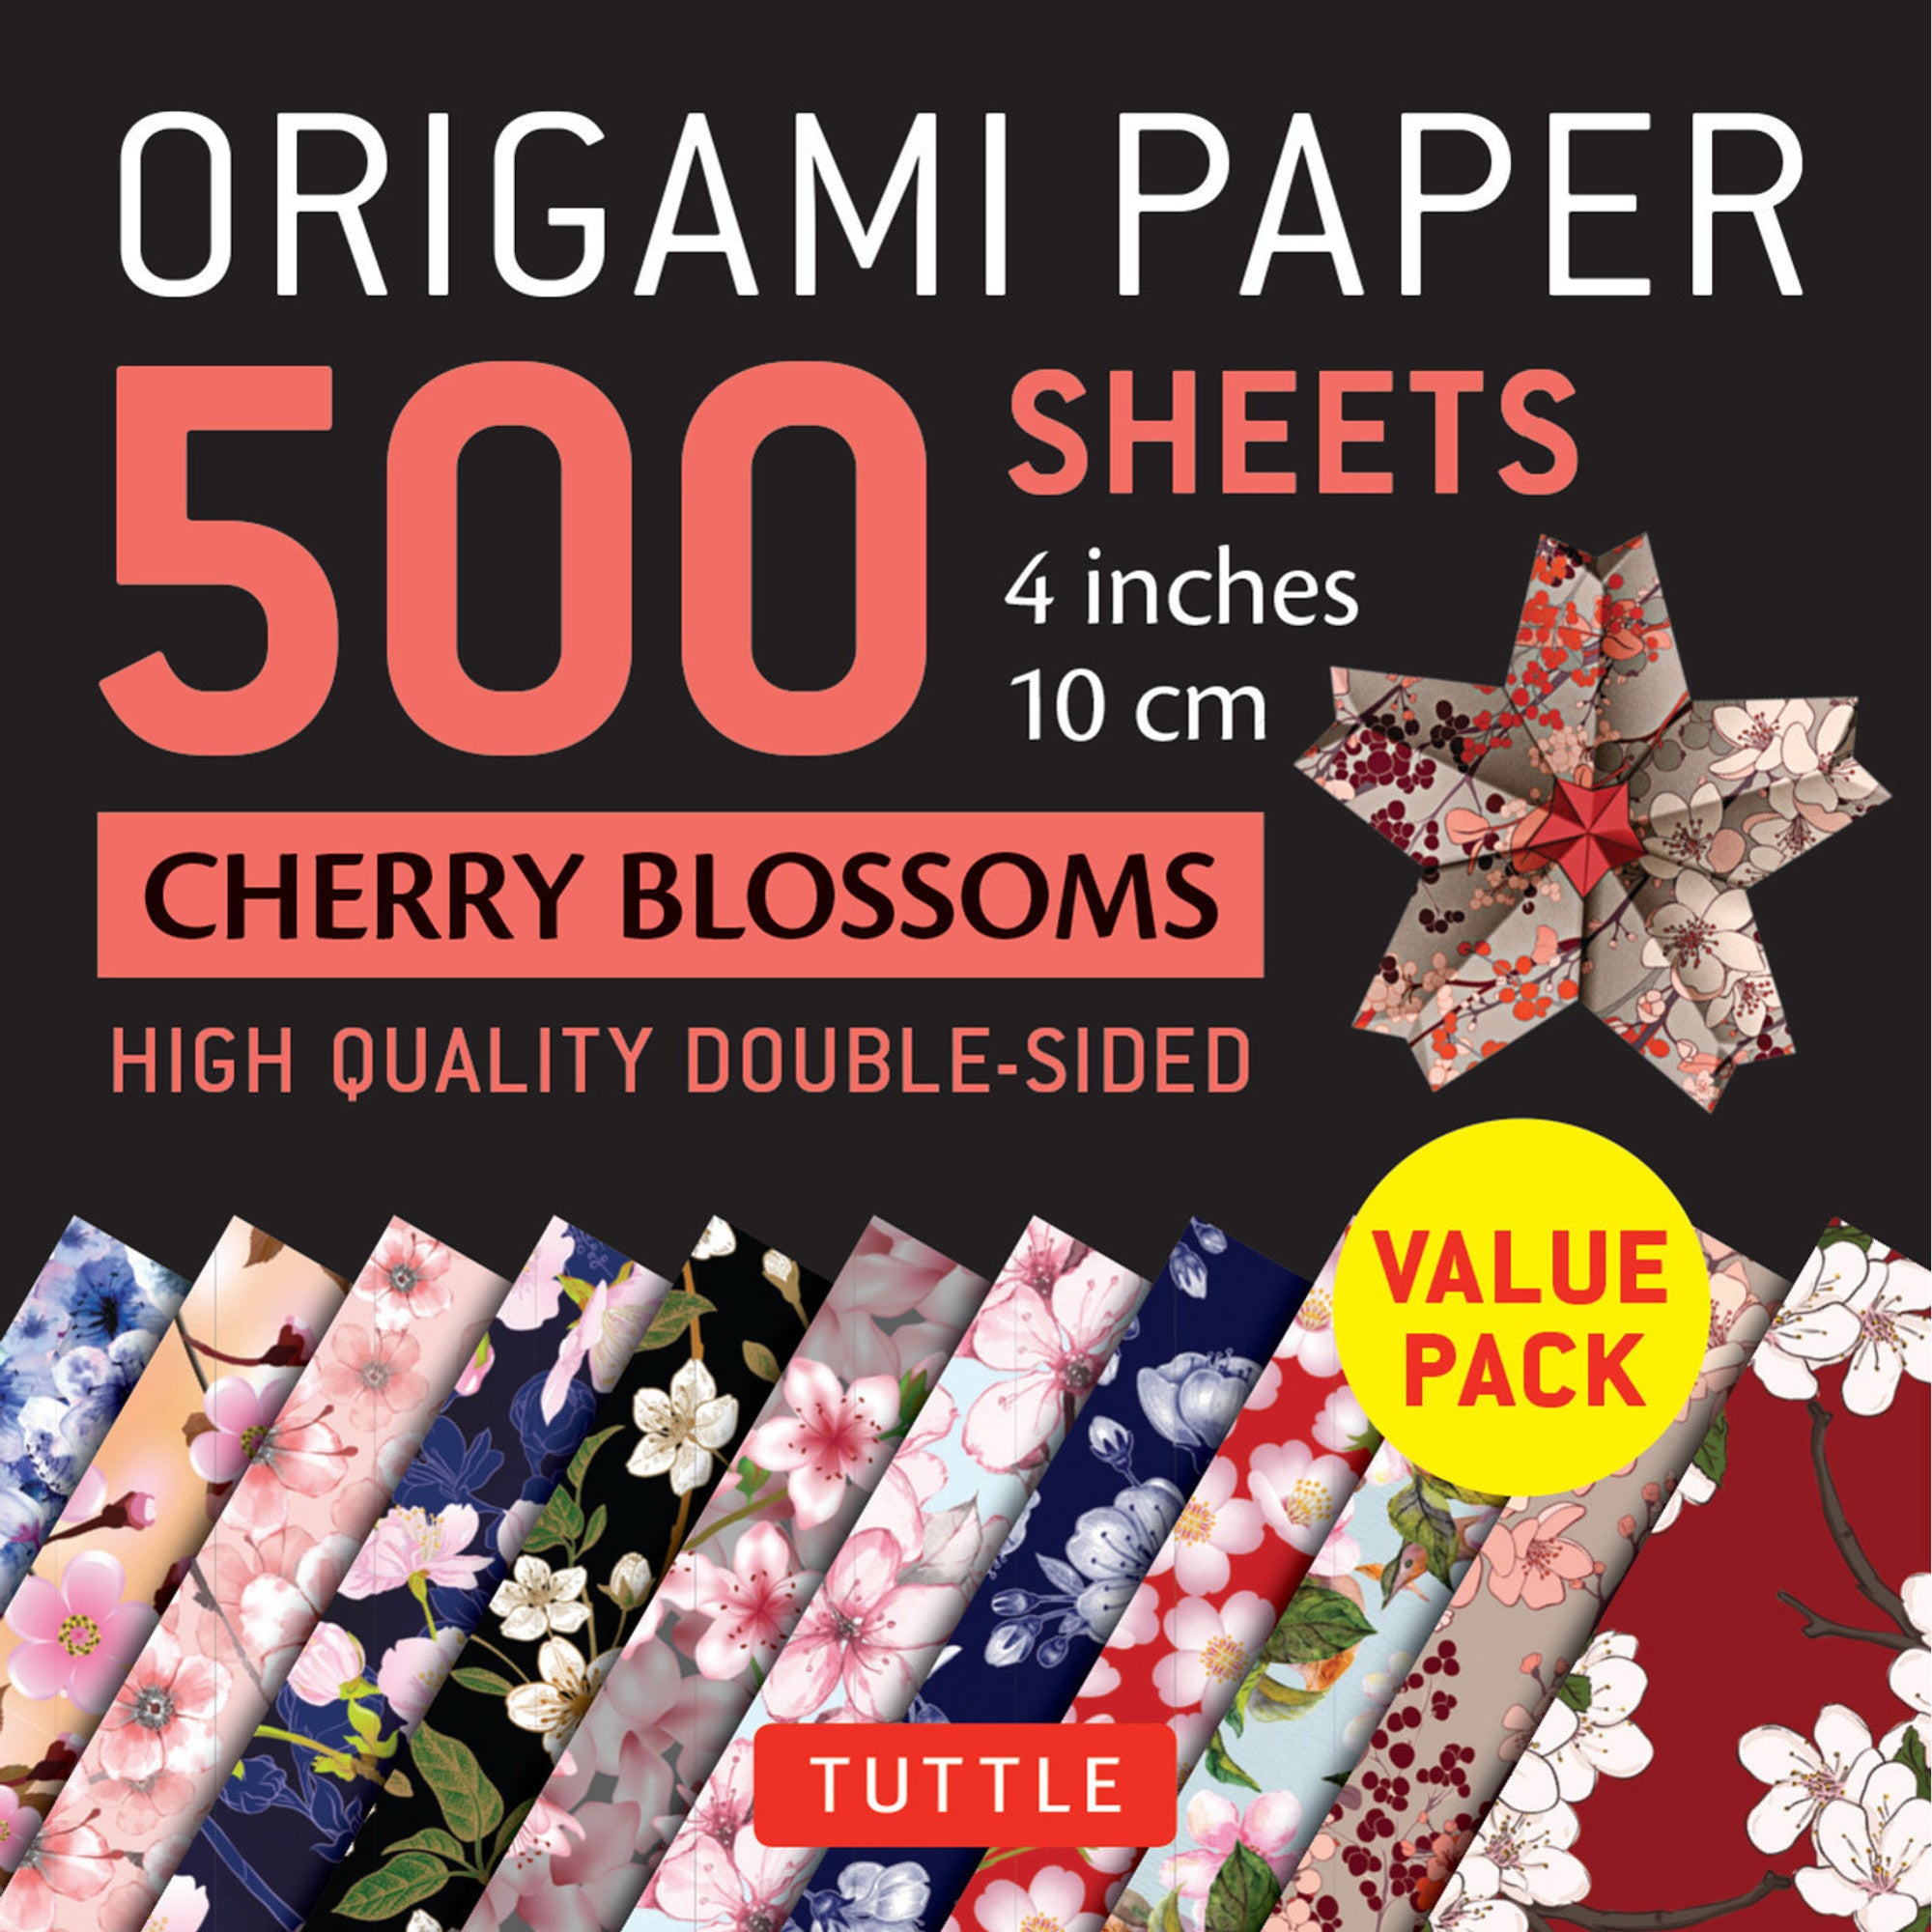 500 Sheets 4” Cherry Blossoms Origami Paper